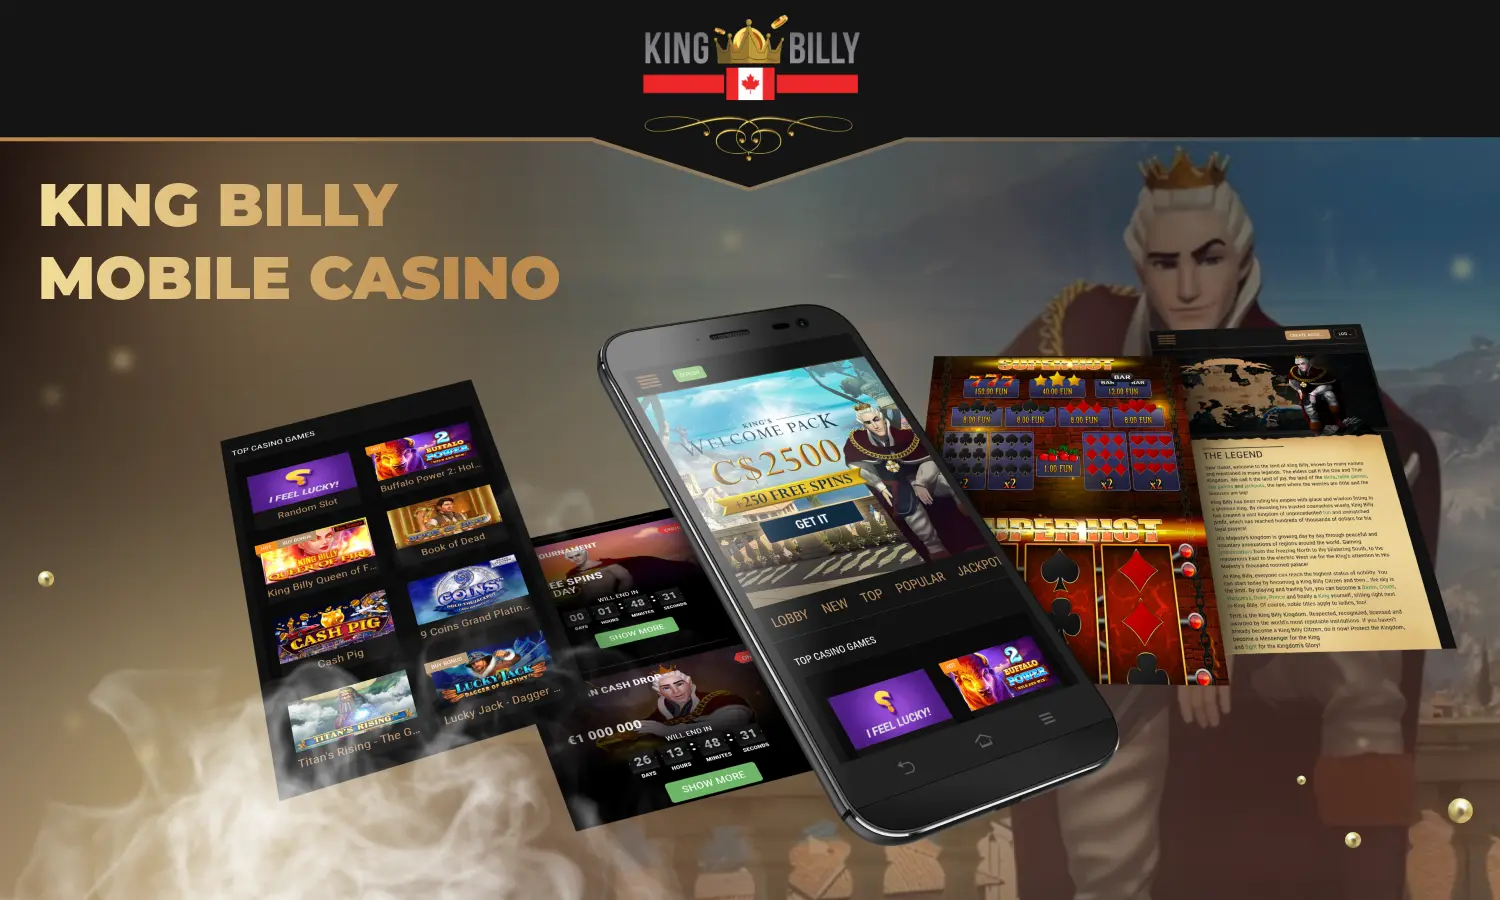 Users from Canada can play at King Billy Casino anywhere and from any device via the mobile version of the site